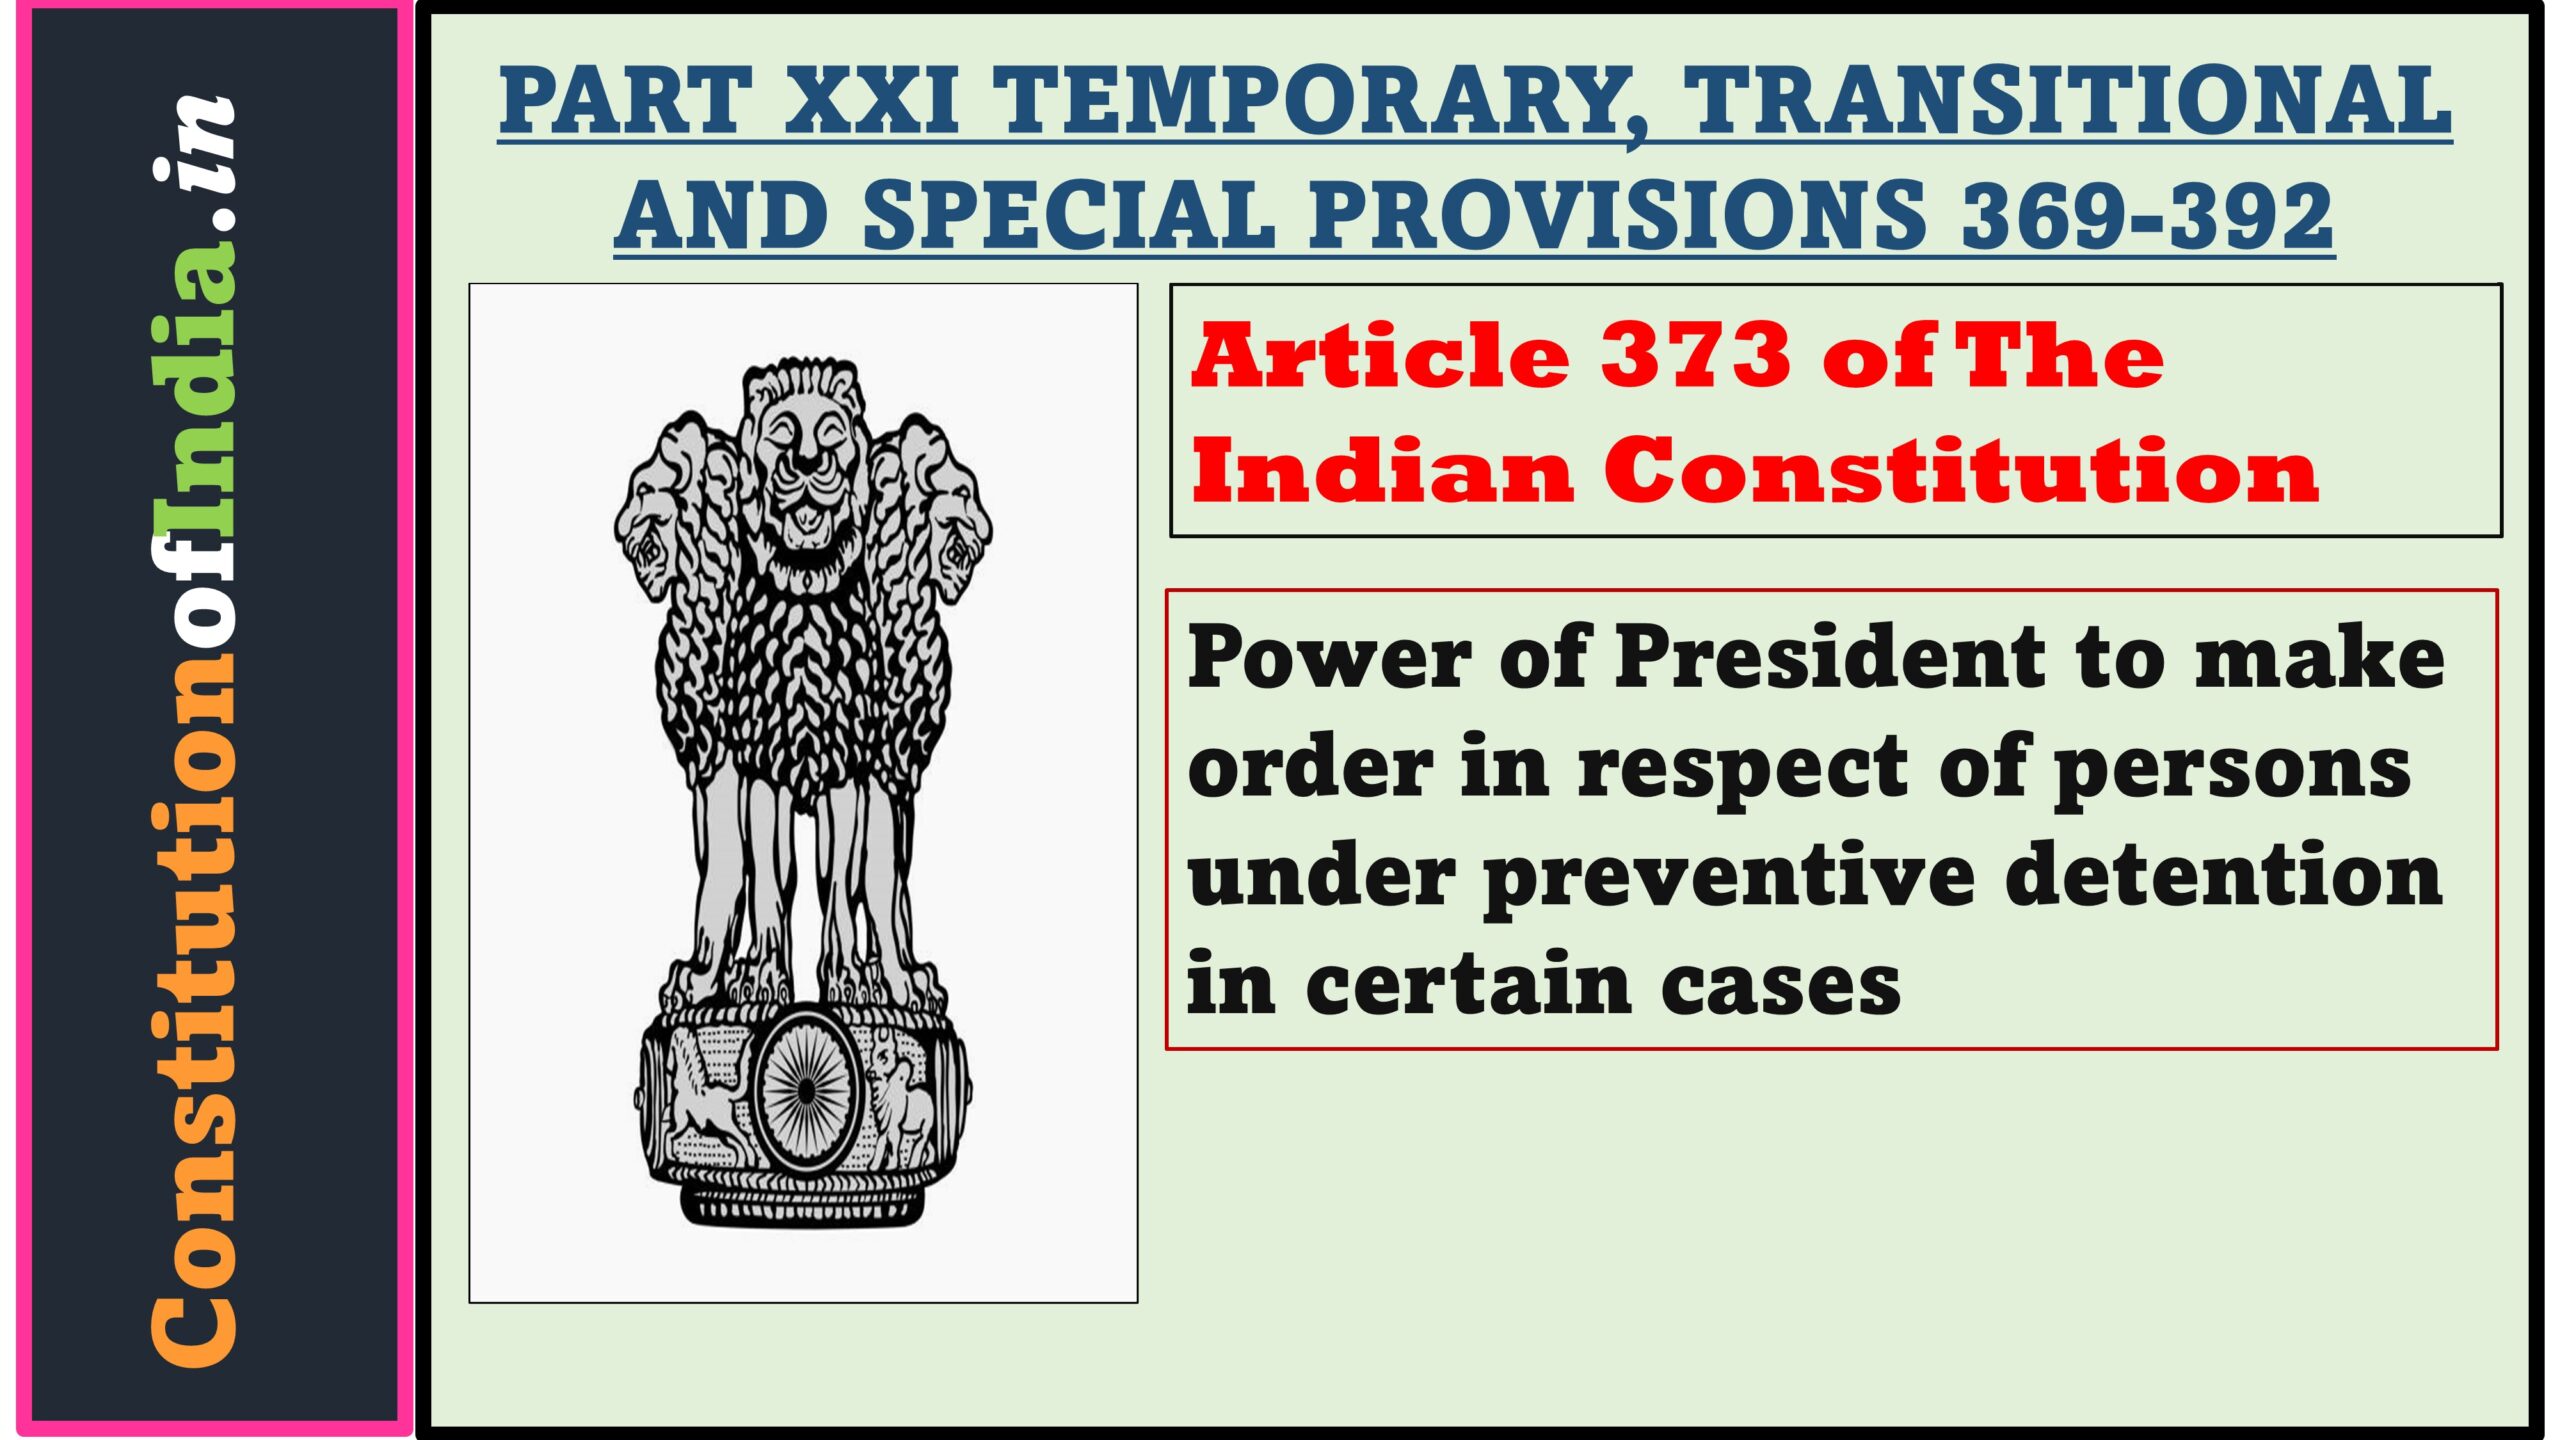 Article 373 of Indian Constitution